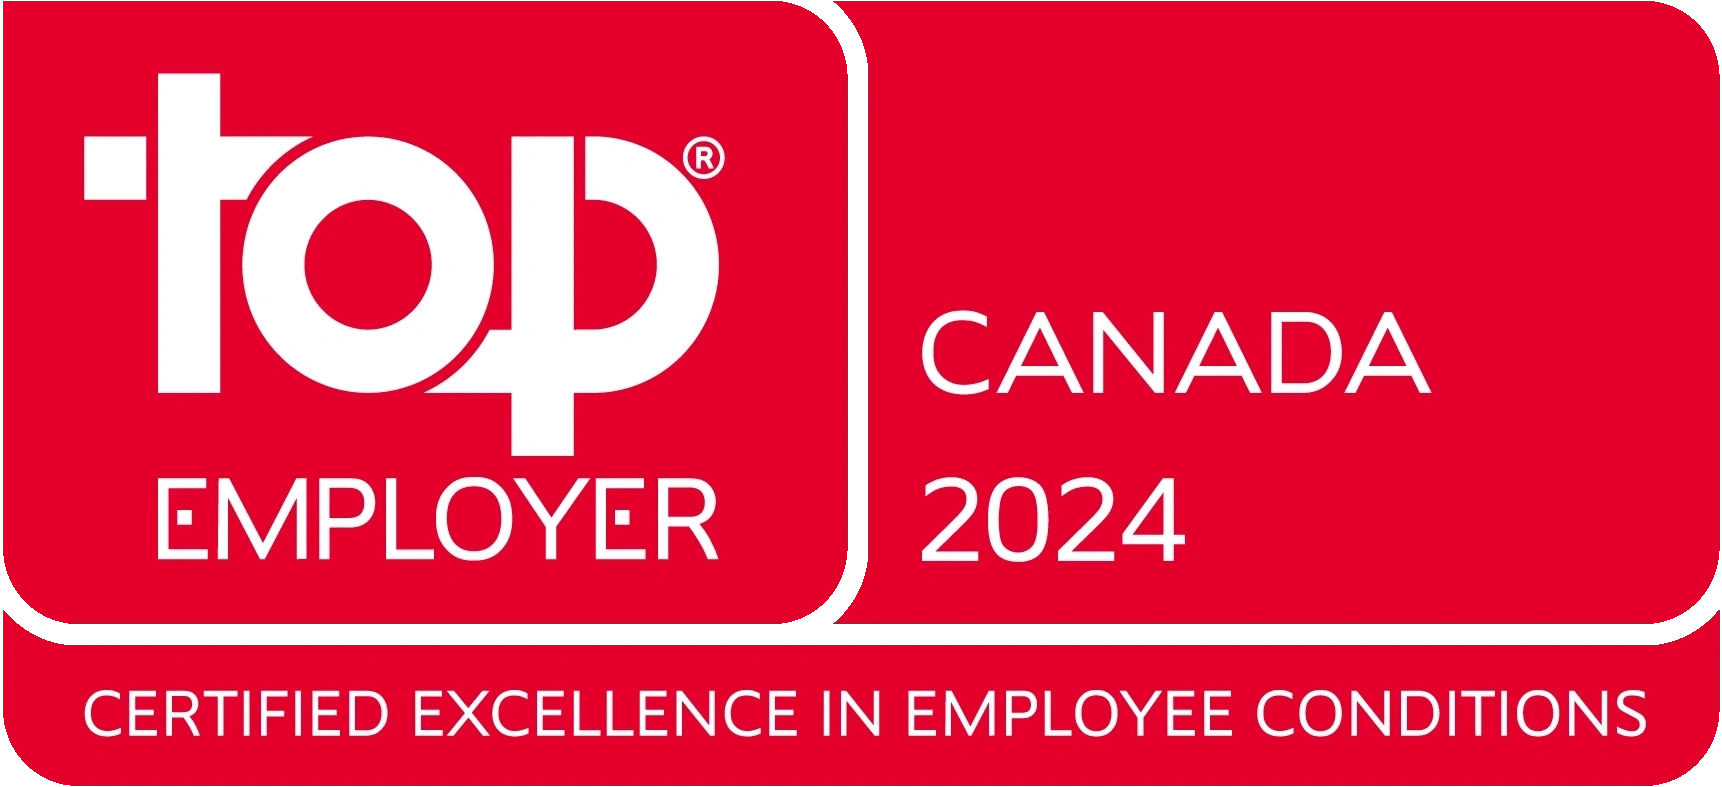 Global Top Employer in Canada